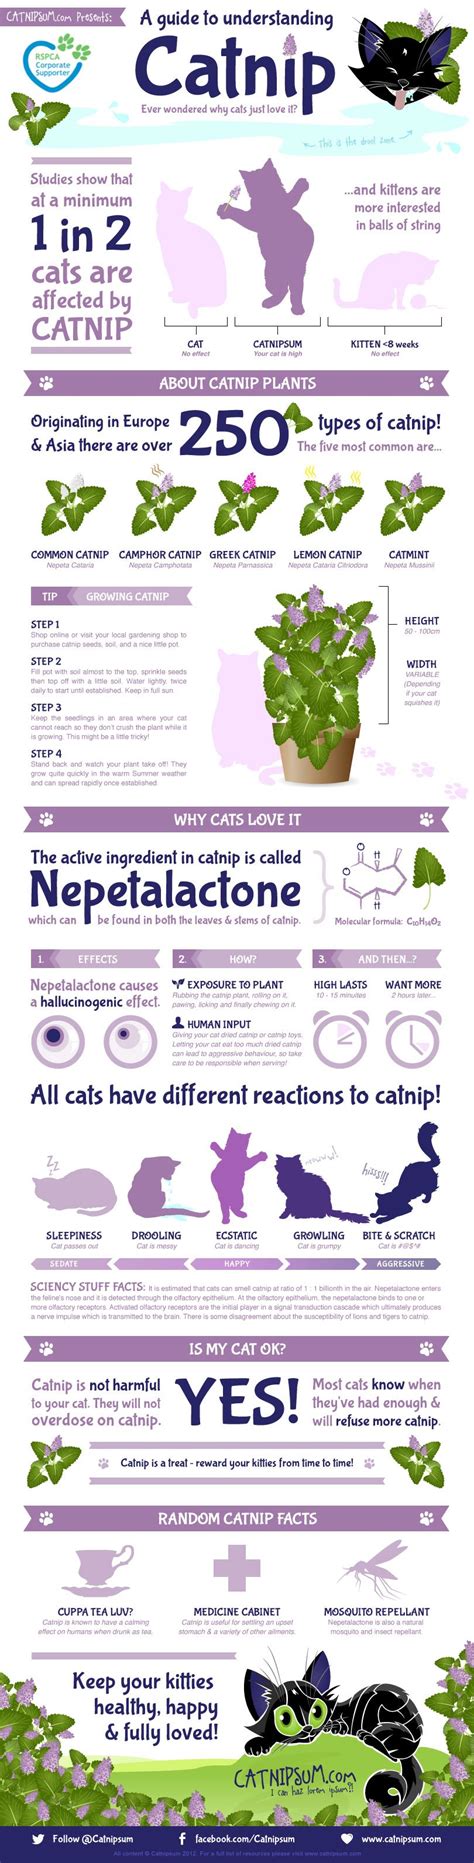 How Catnip Affects Cats - Siamese Cats and Kittens